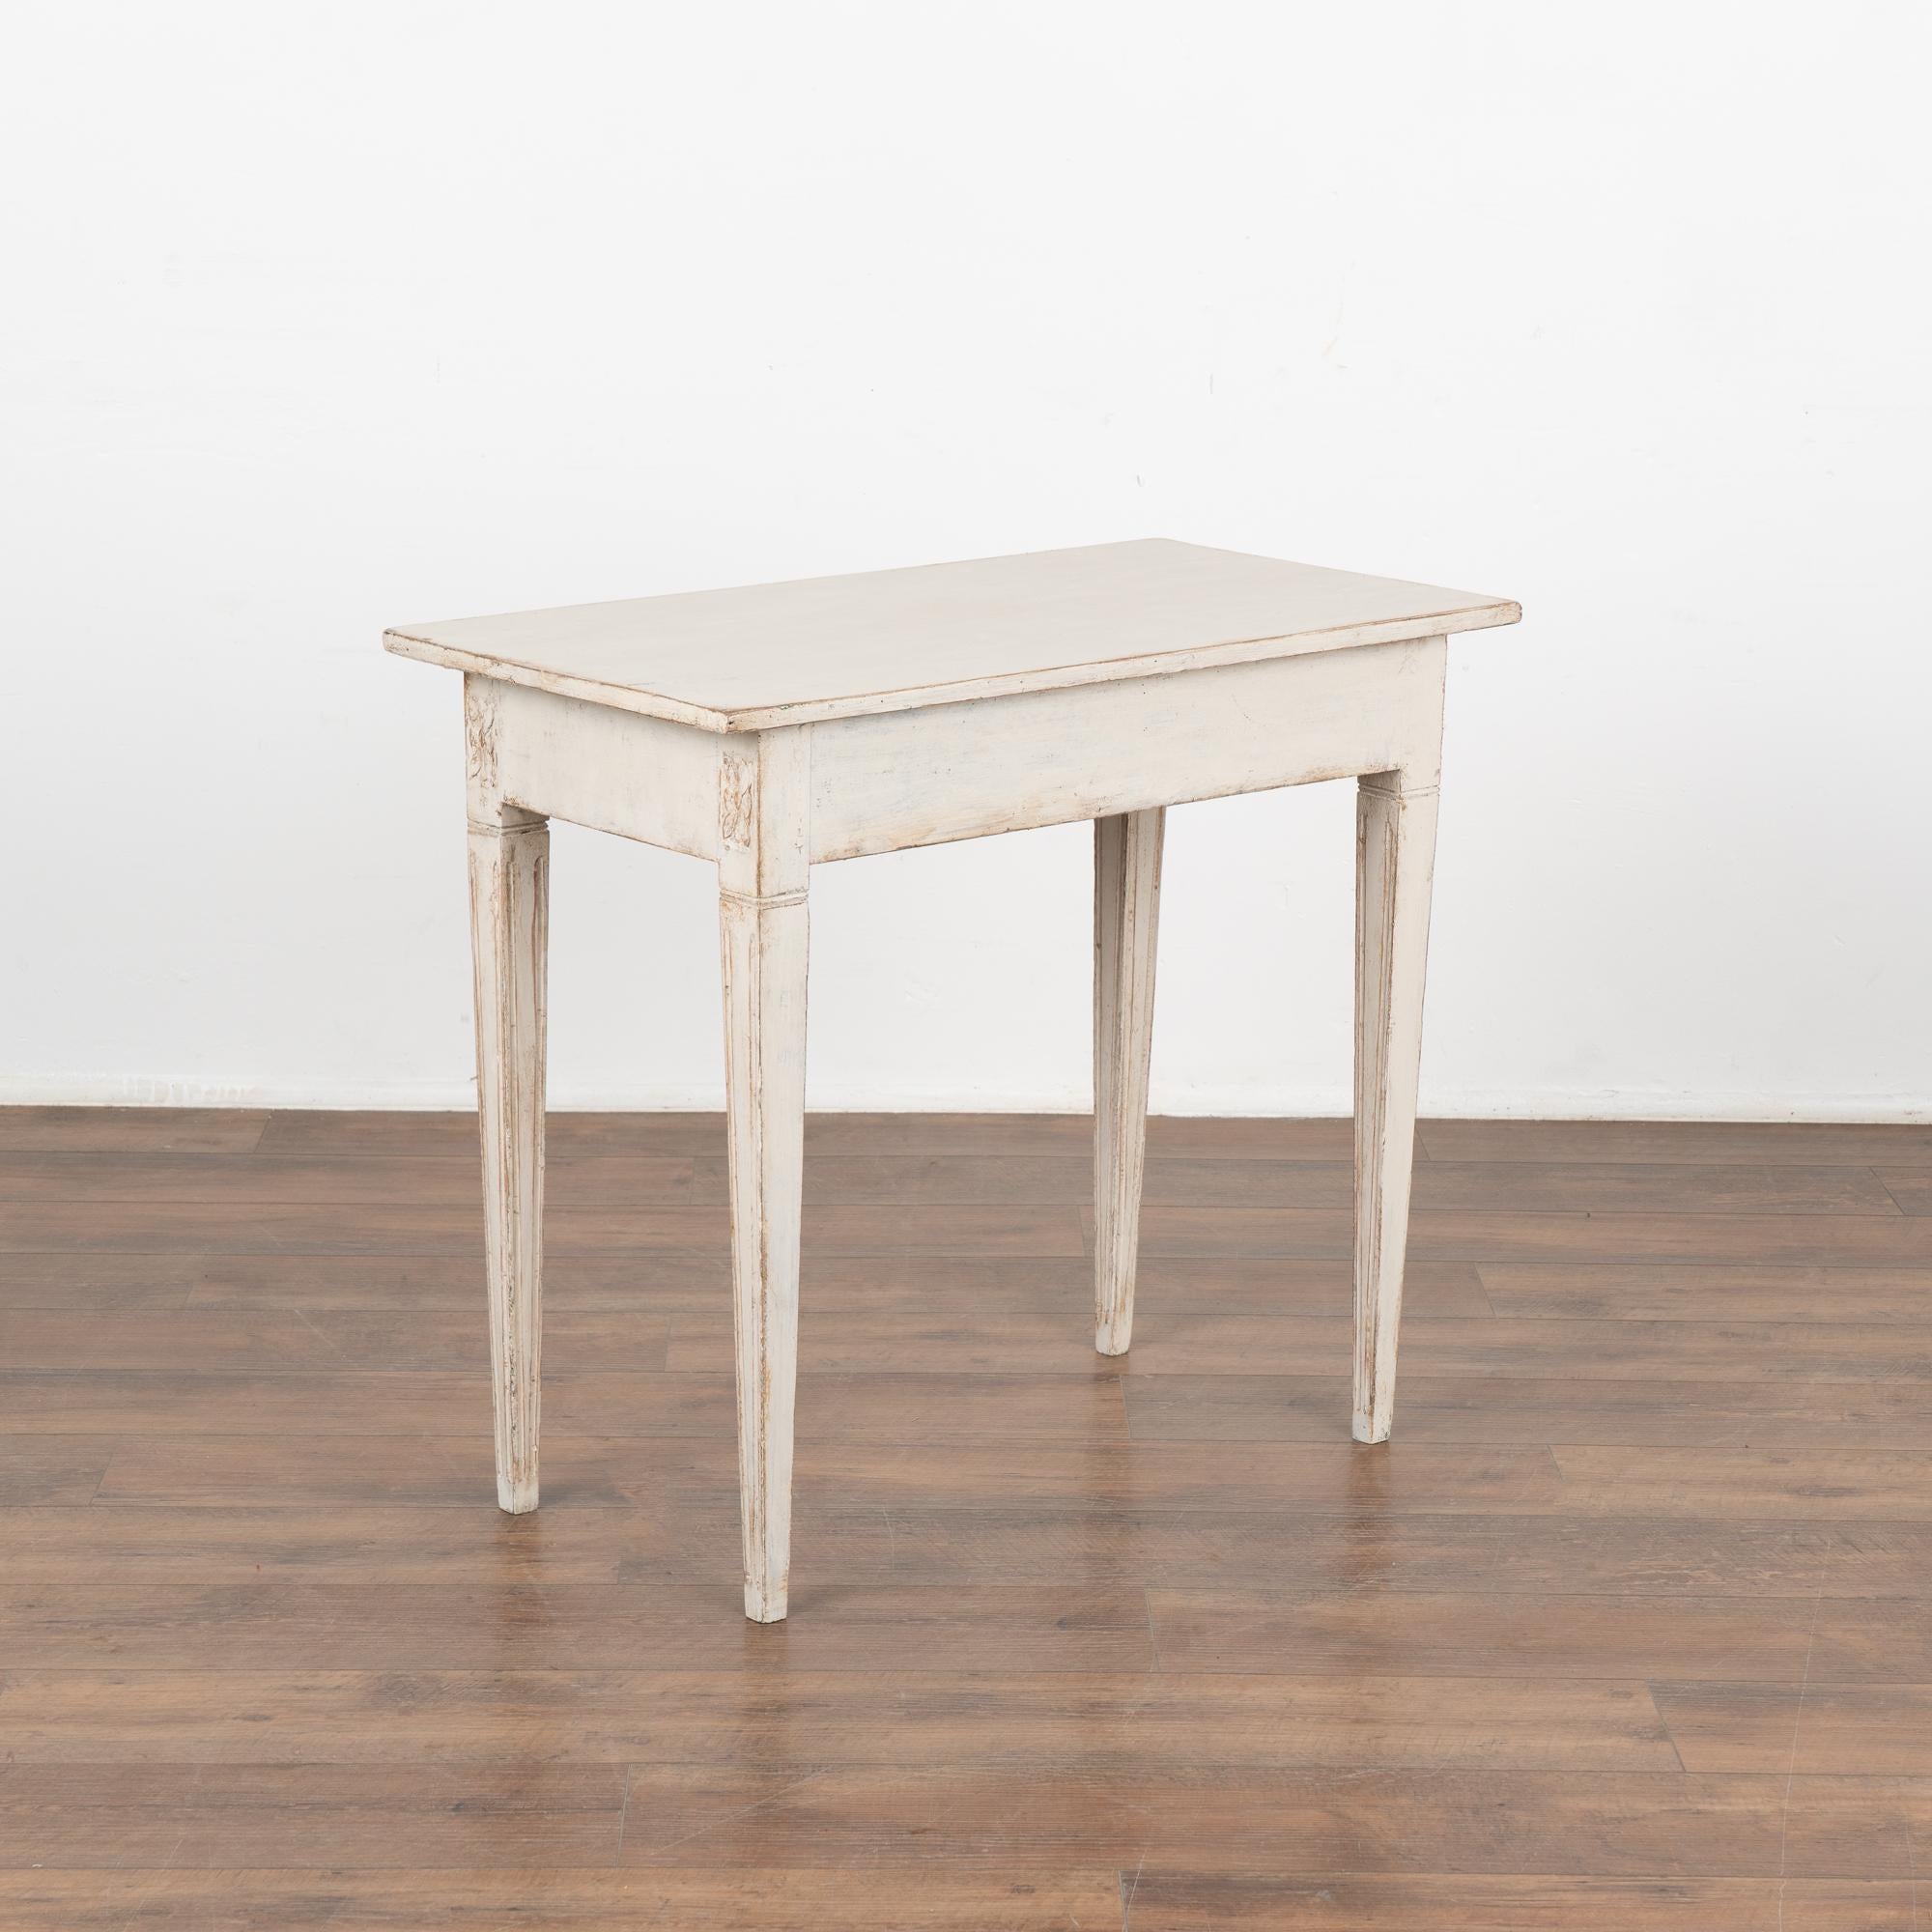 White Painted Side Table With Single Drawer, Sweden circa 1860-80 For Sale 5